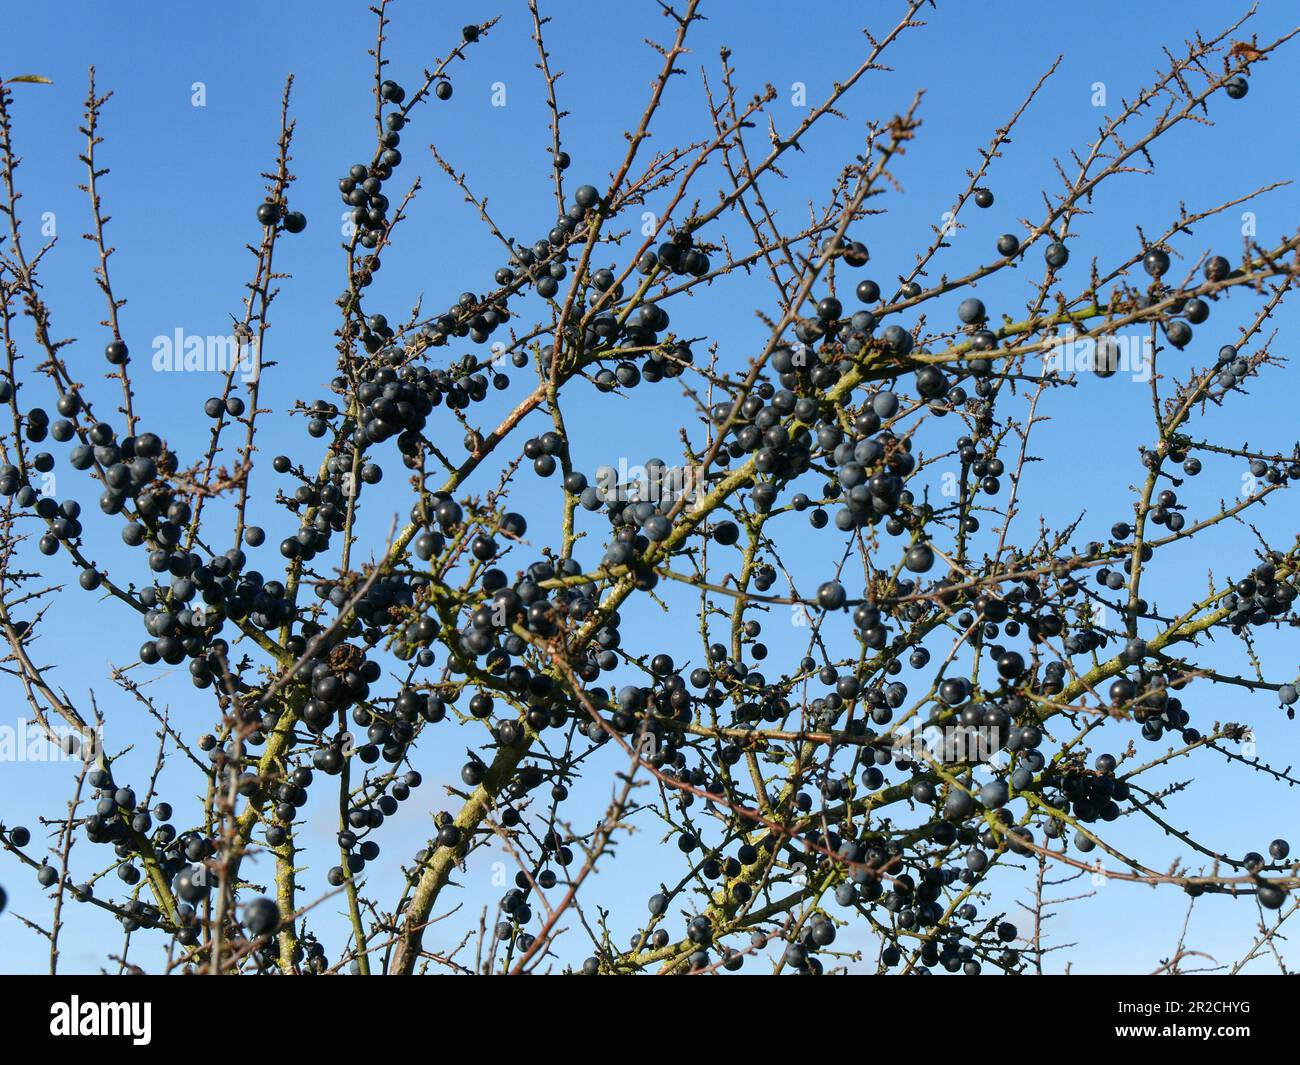 A blackthorn (Prunus spinosa) bush covered in sloe berries with blue sky behind, in Autumn, UK Stock Photo